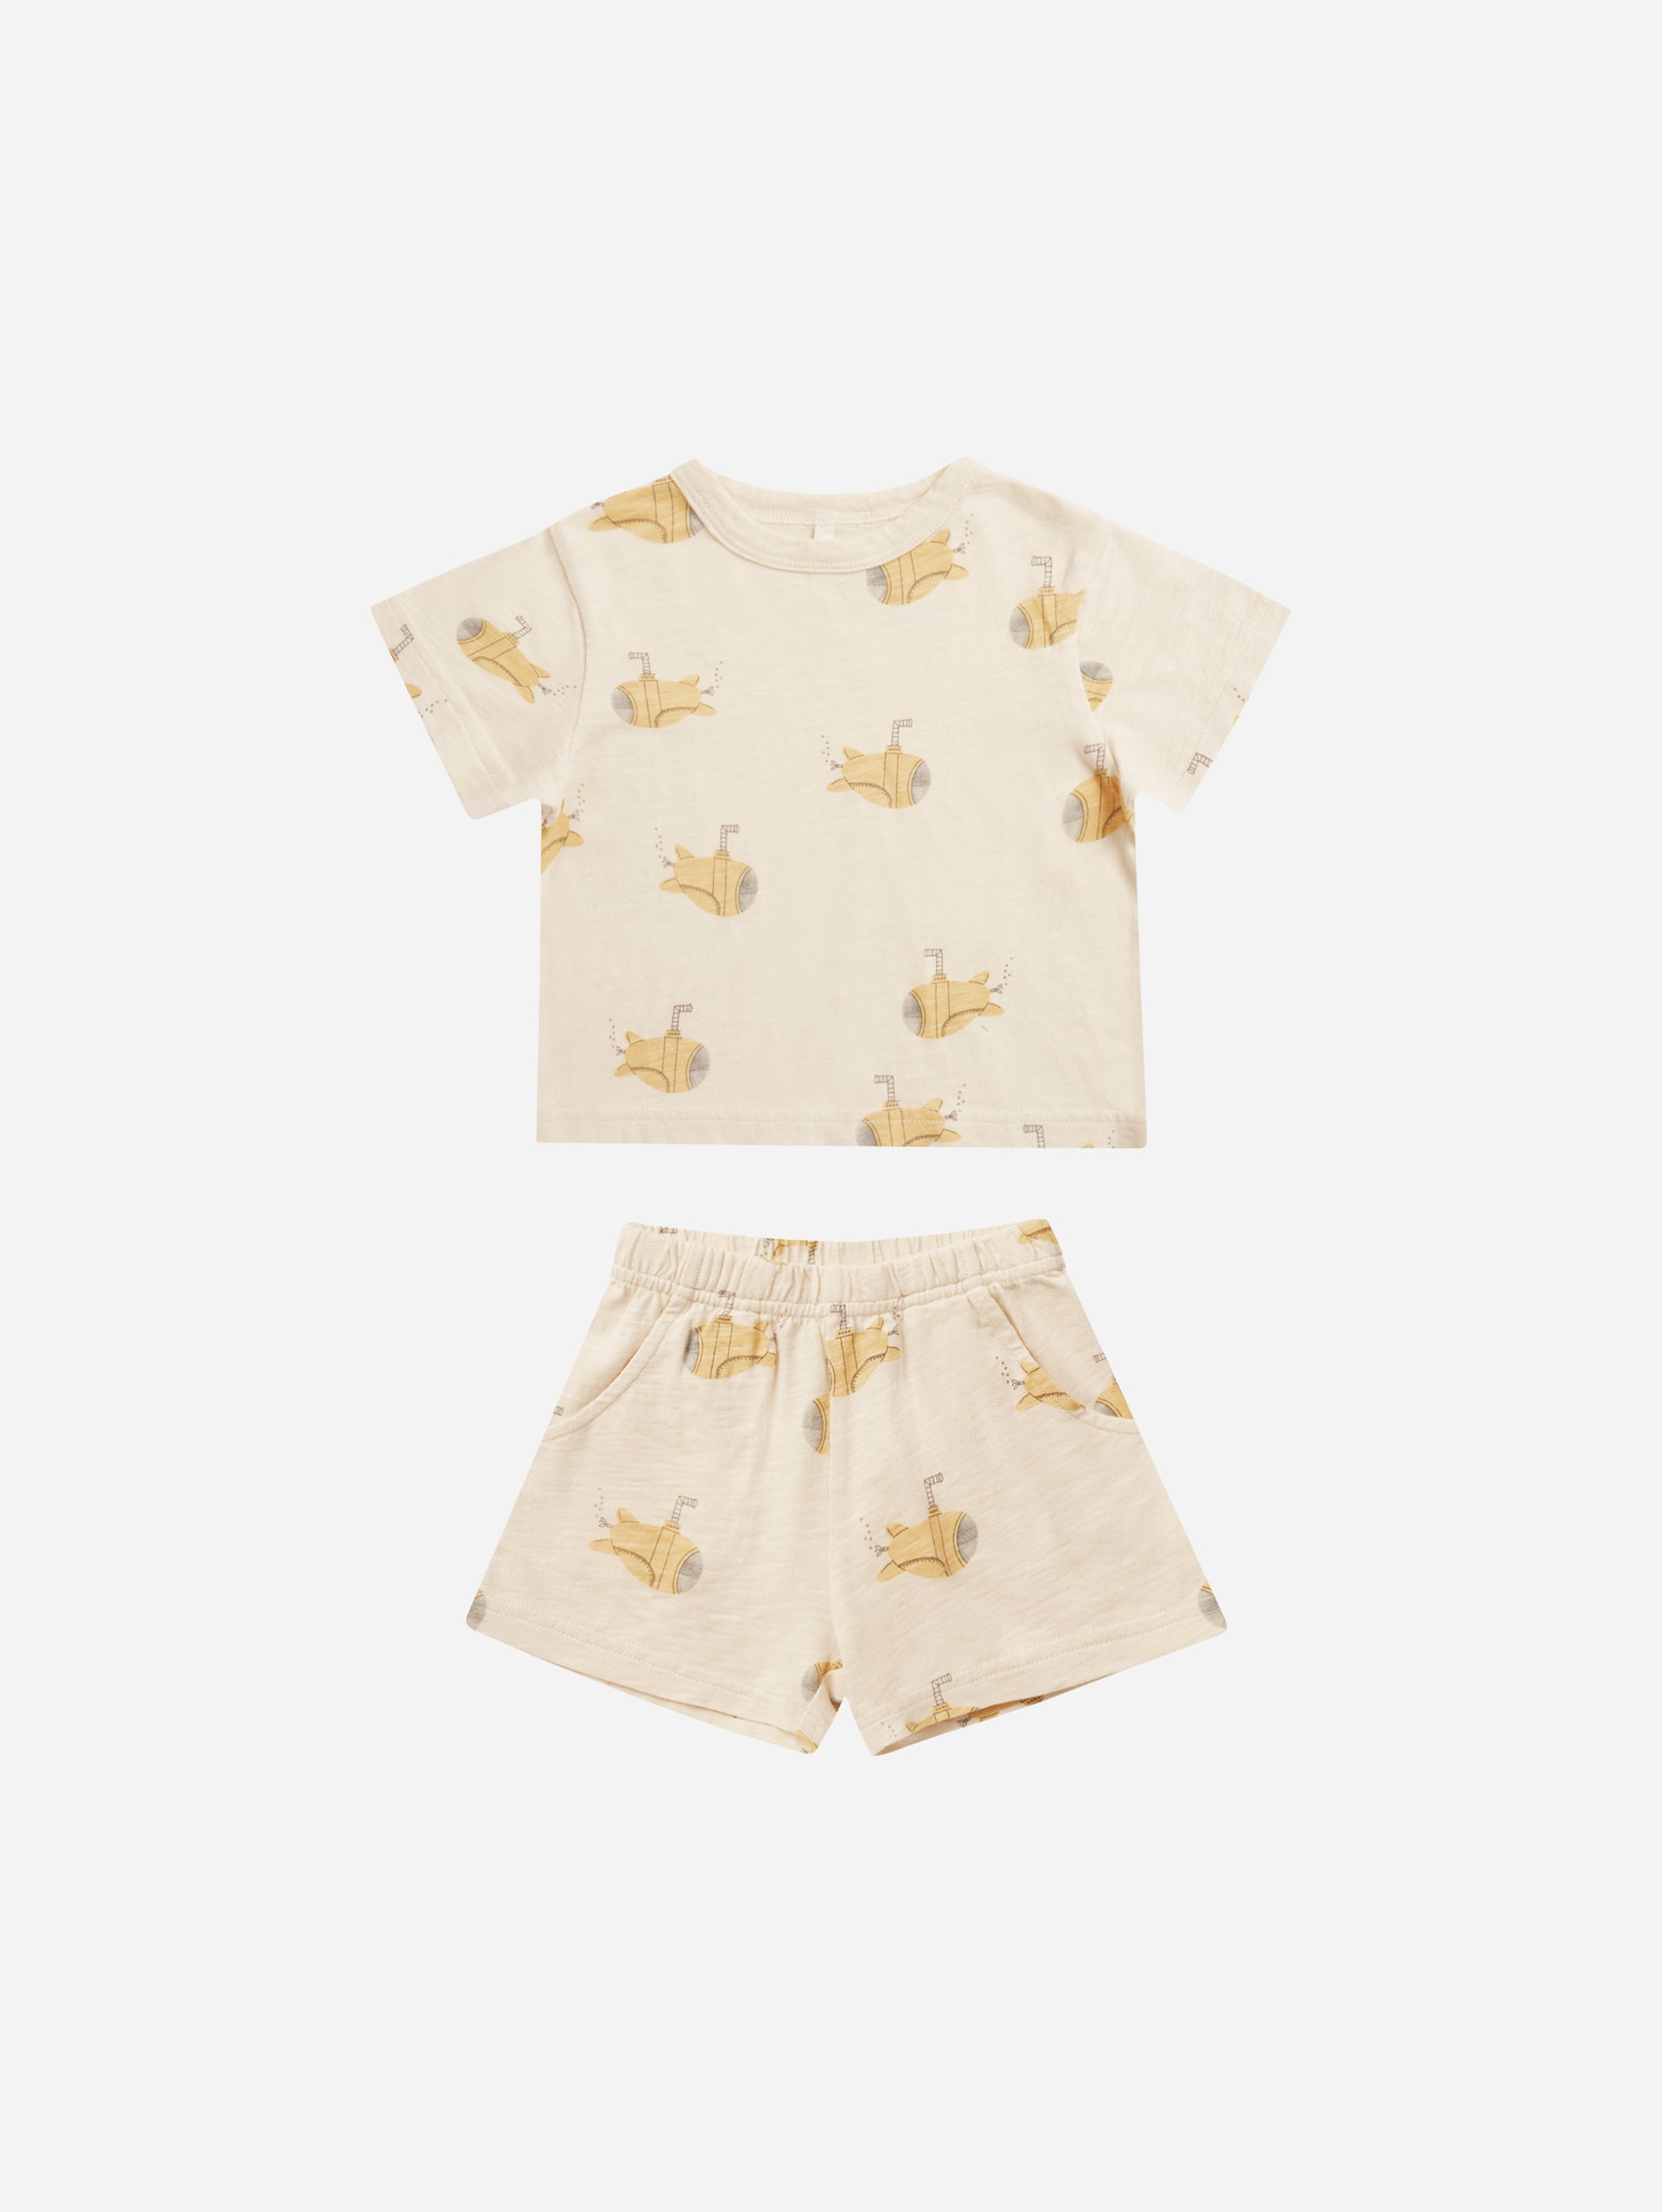 Jersey Set || Submarine - Rylee + Cru | Kids Clothes | Trendy Baby Clothes | Modern Infant Outfits |